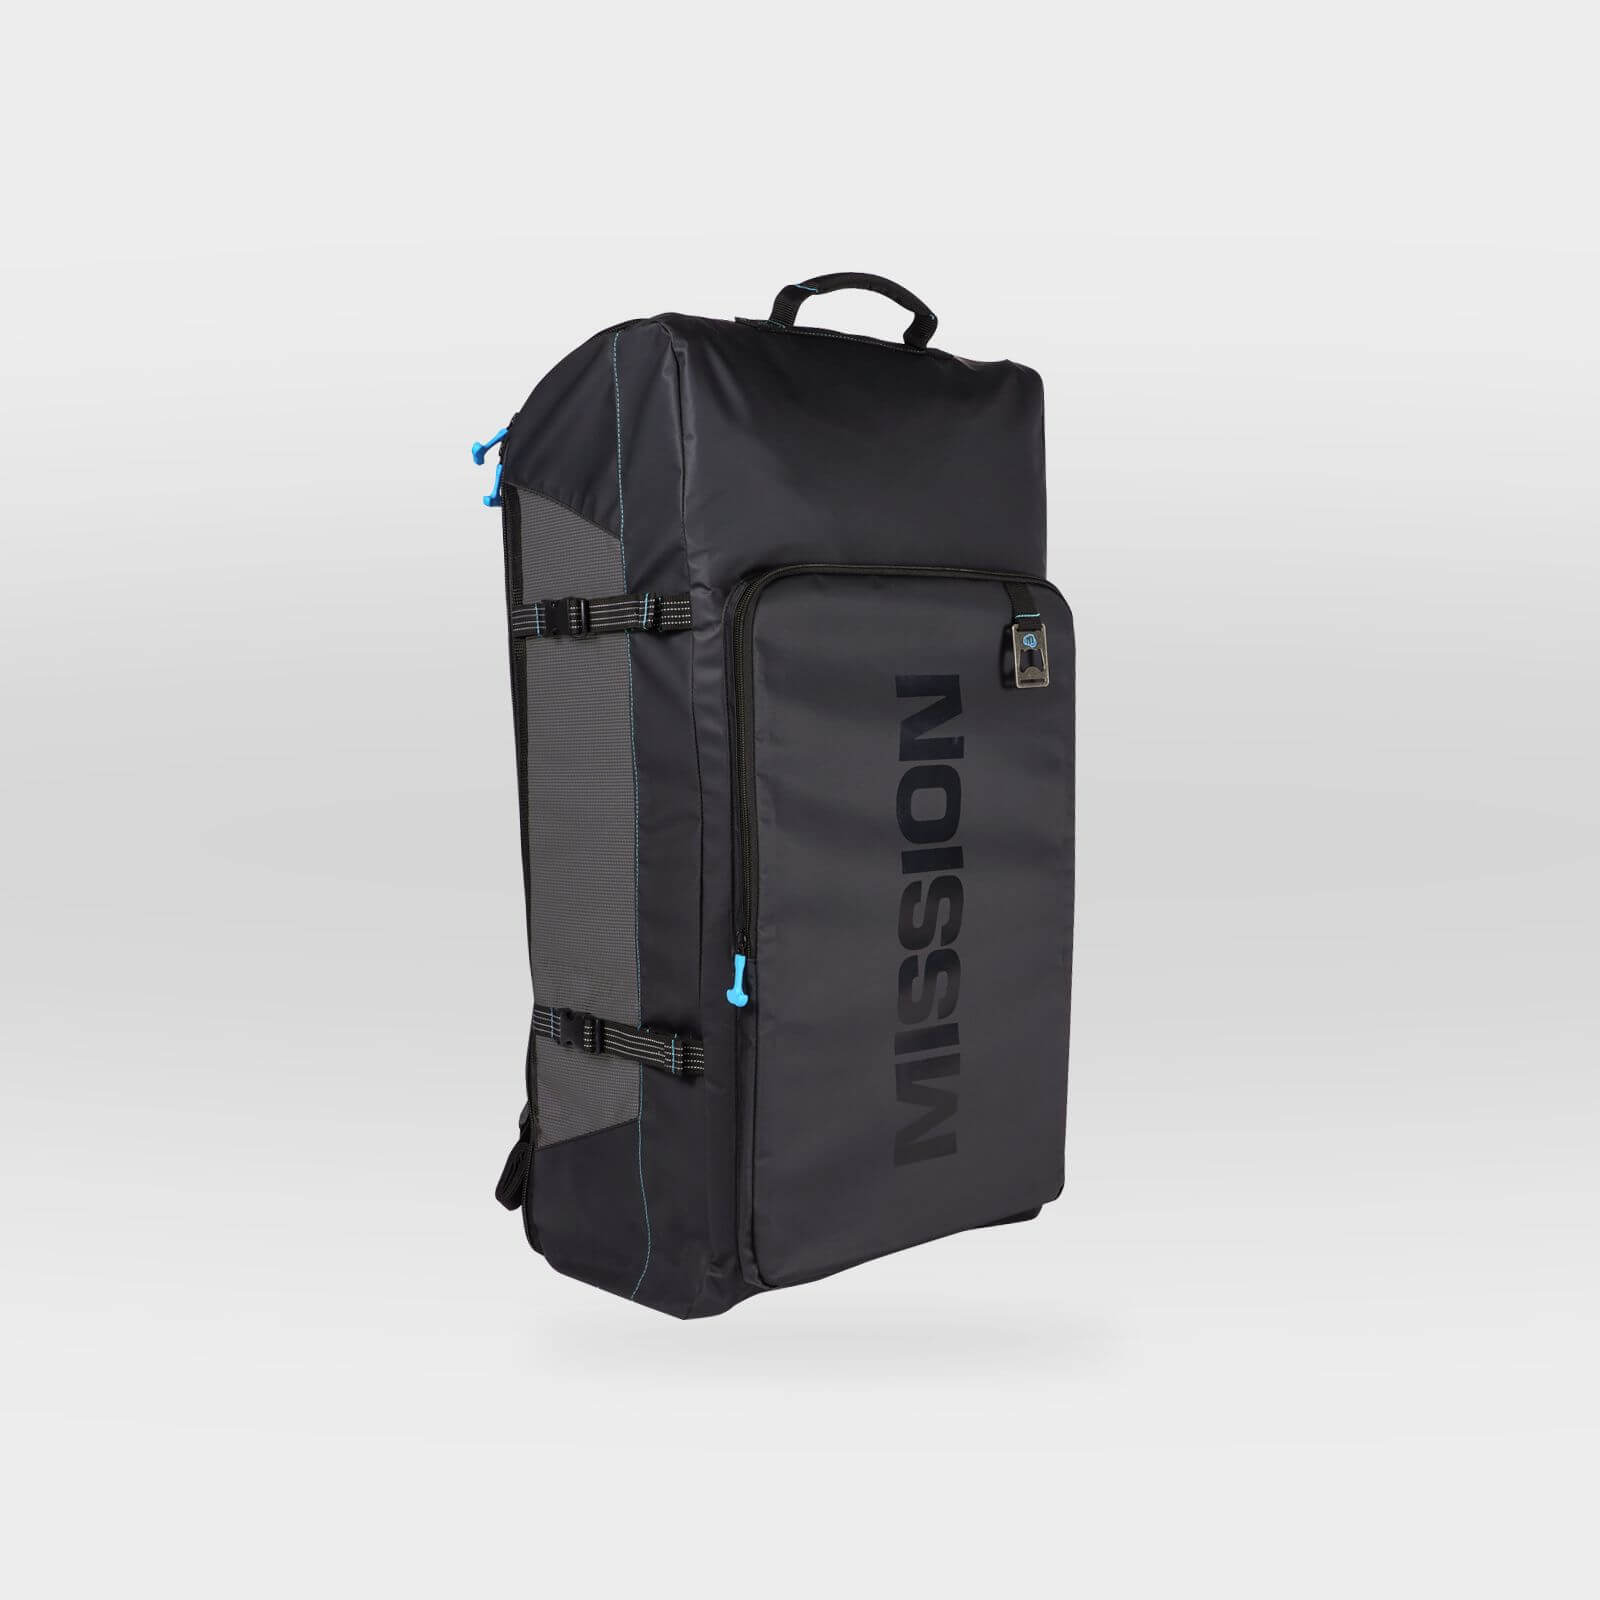 A black backpack with the word MISSION on it, perfect for carrying your essentials and serving as a convenient backpack storage bag.